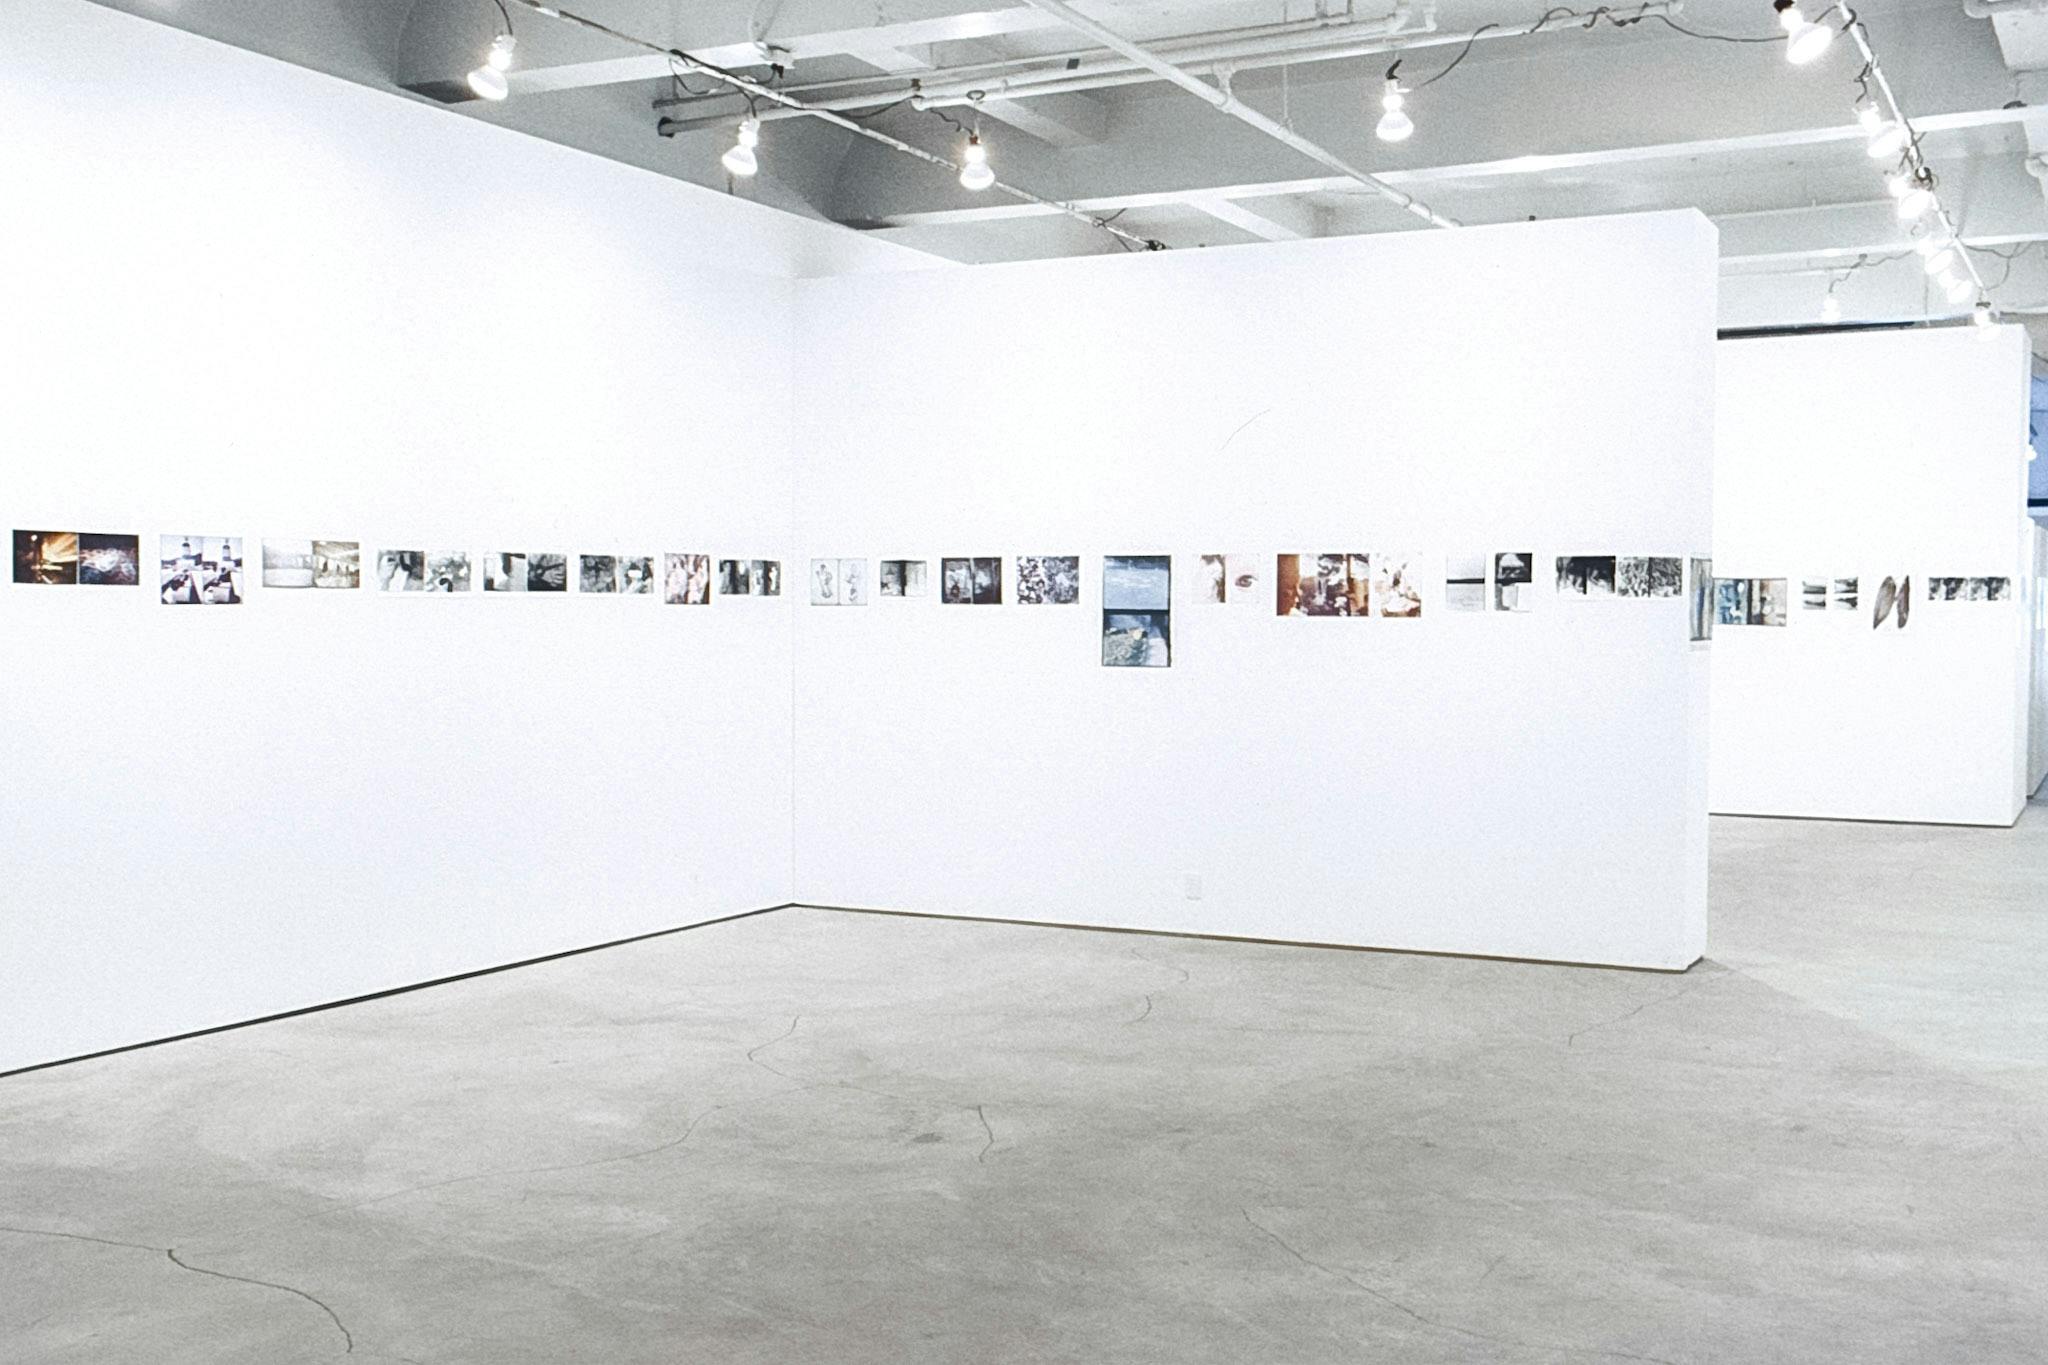 A gallery with a white wall devings the space. Several photos, both in colour and black and white, are arranged in a line across all walls. The photos vary in size and orientation. 